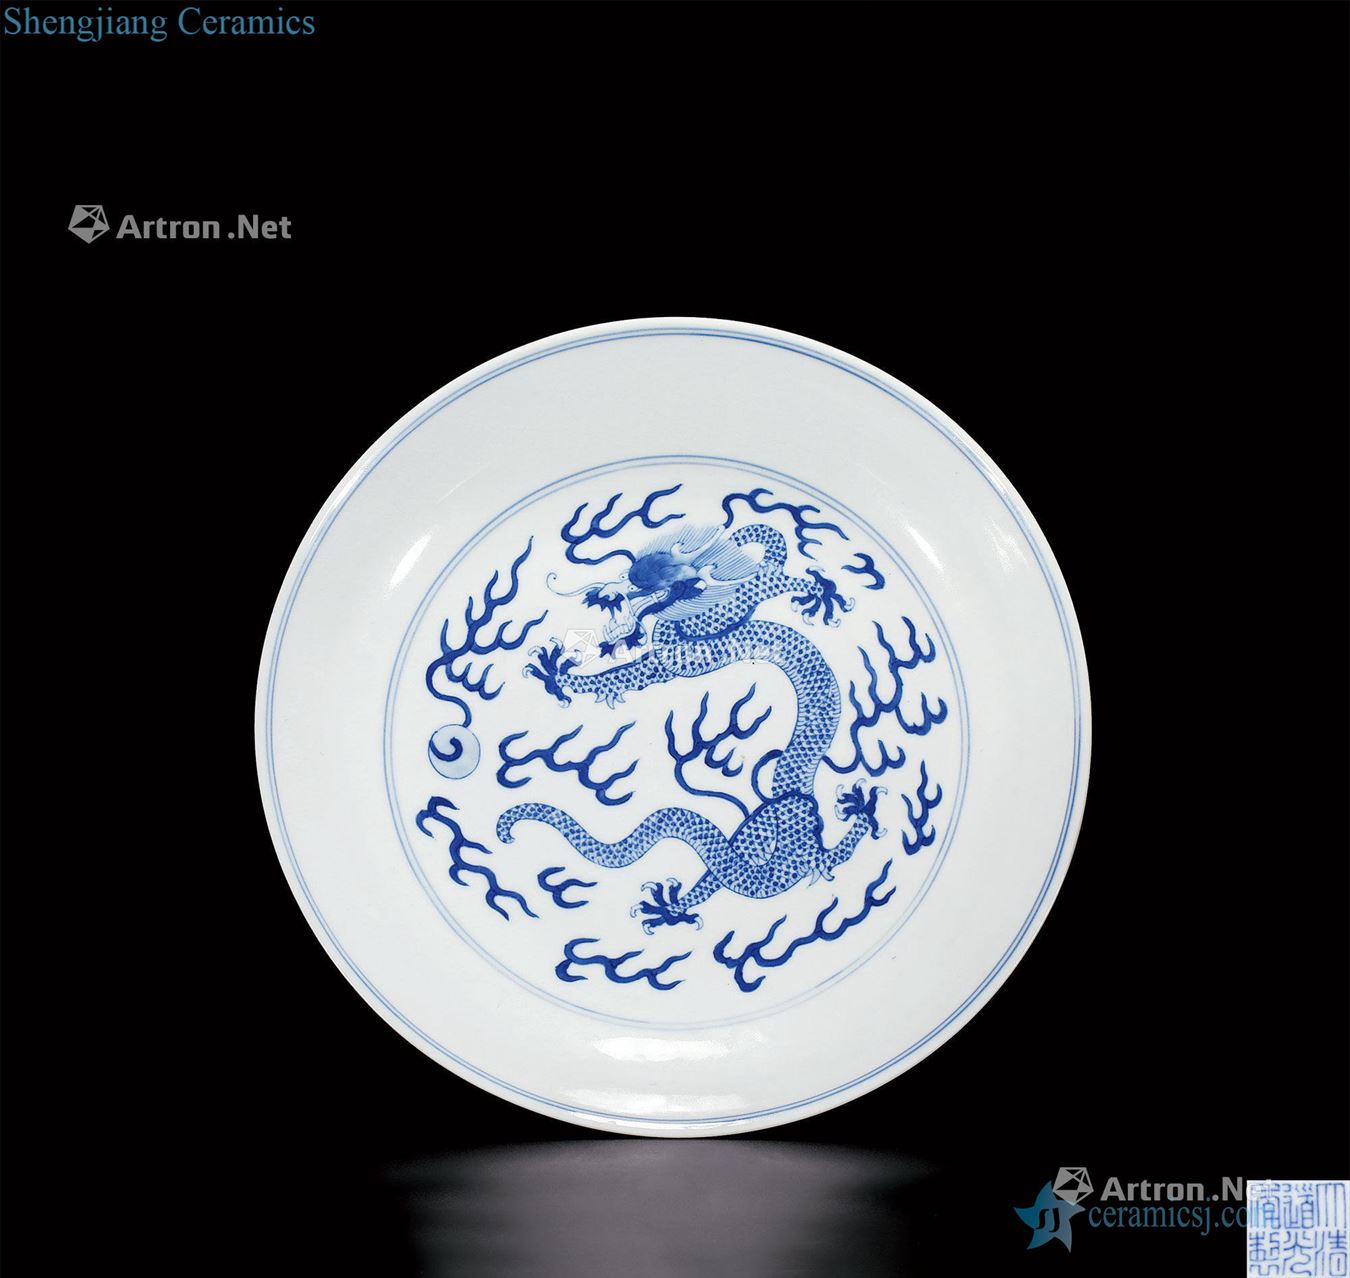 Qing daoguang Blue and white dragon disc